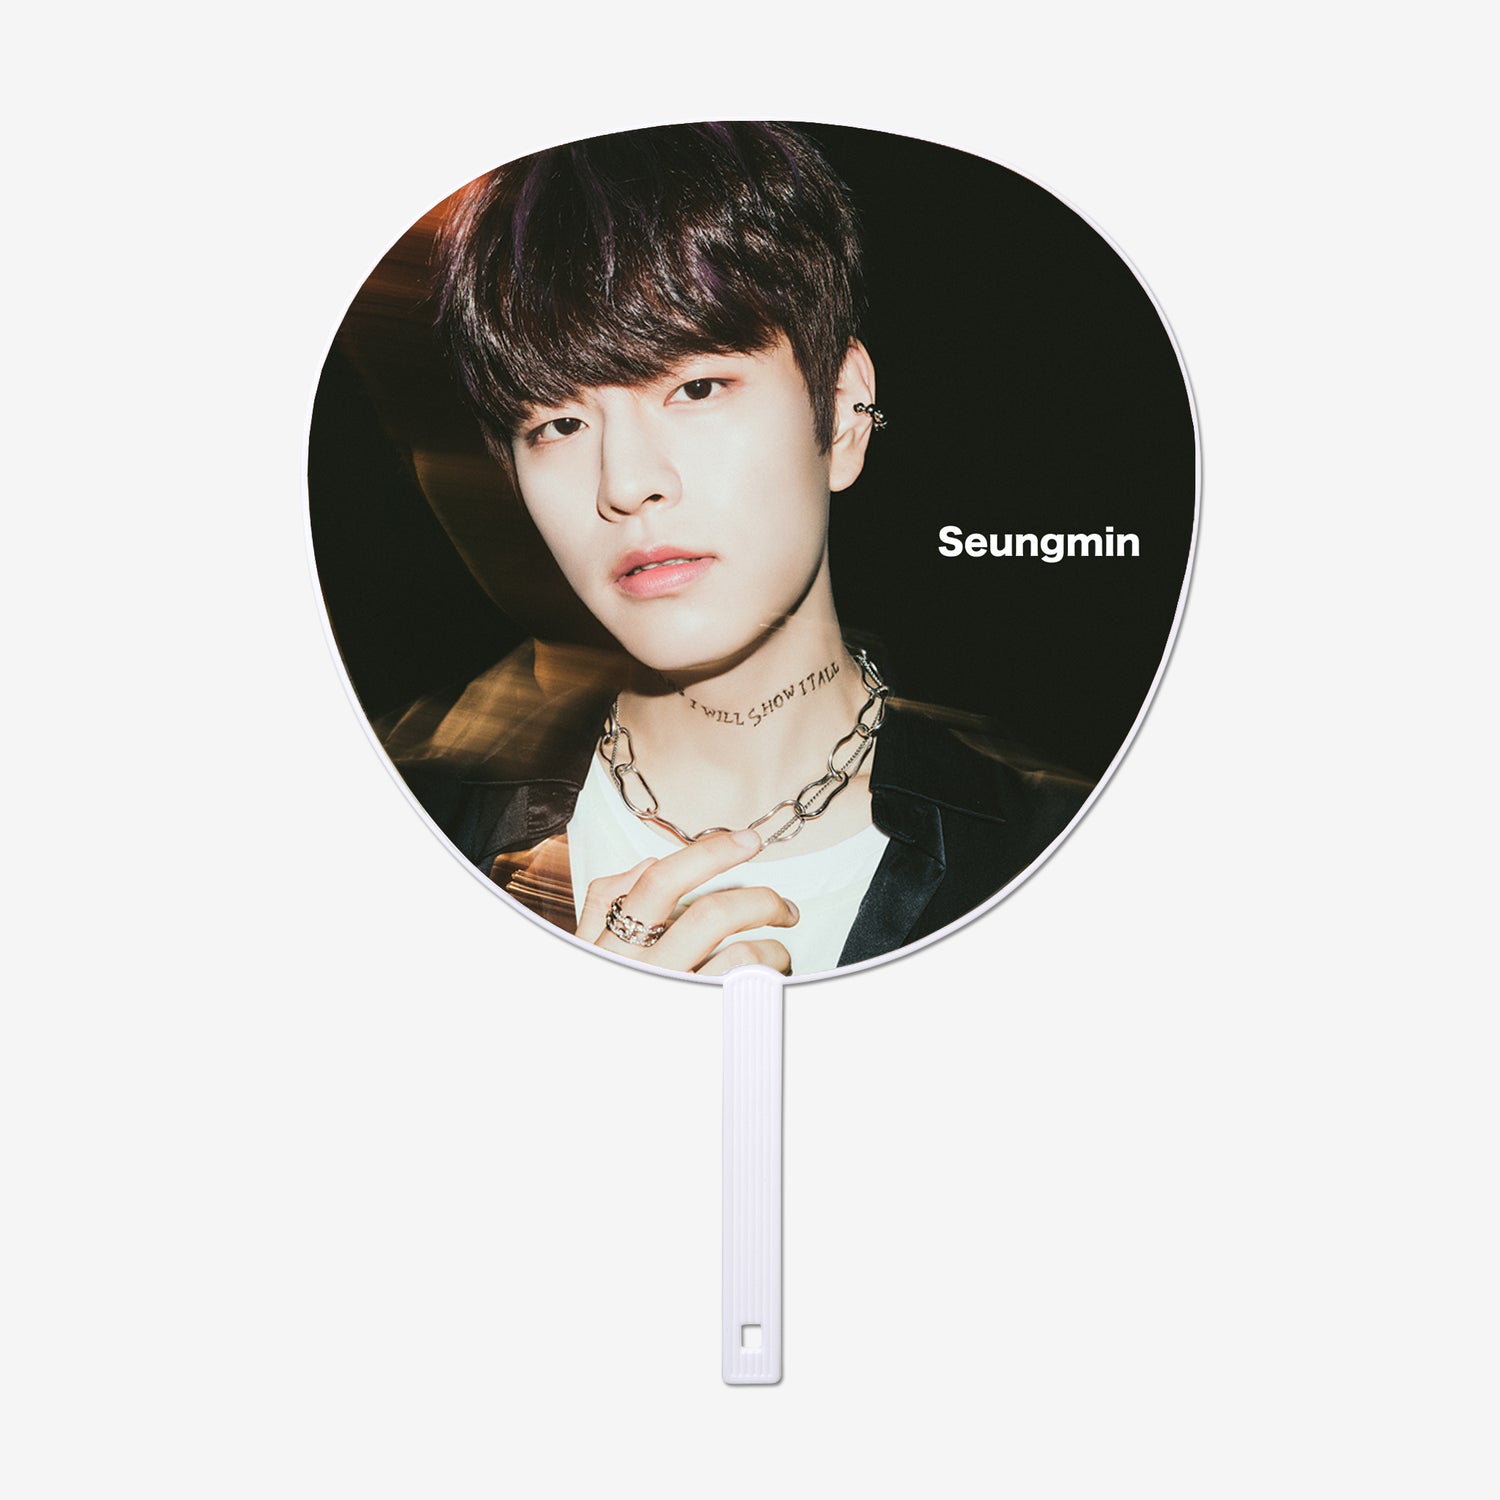 IMAGE PICKET - Seungmin